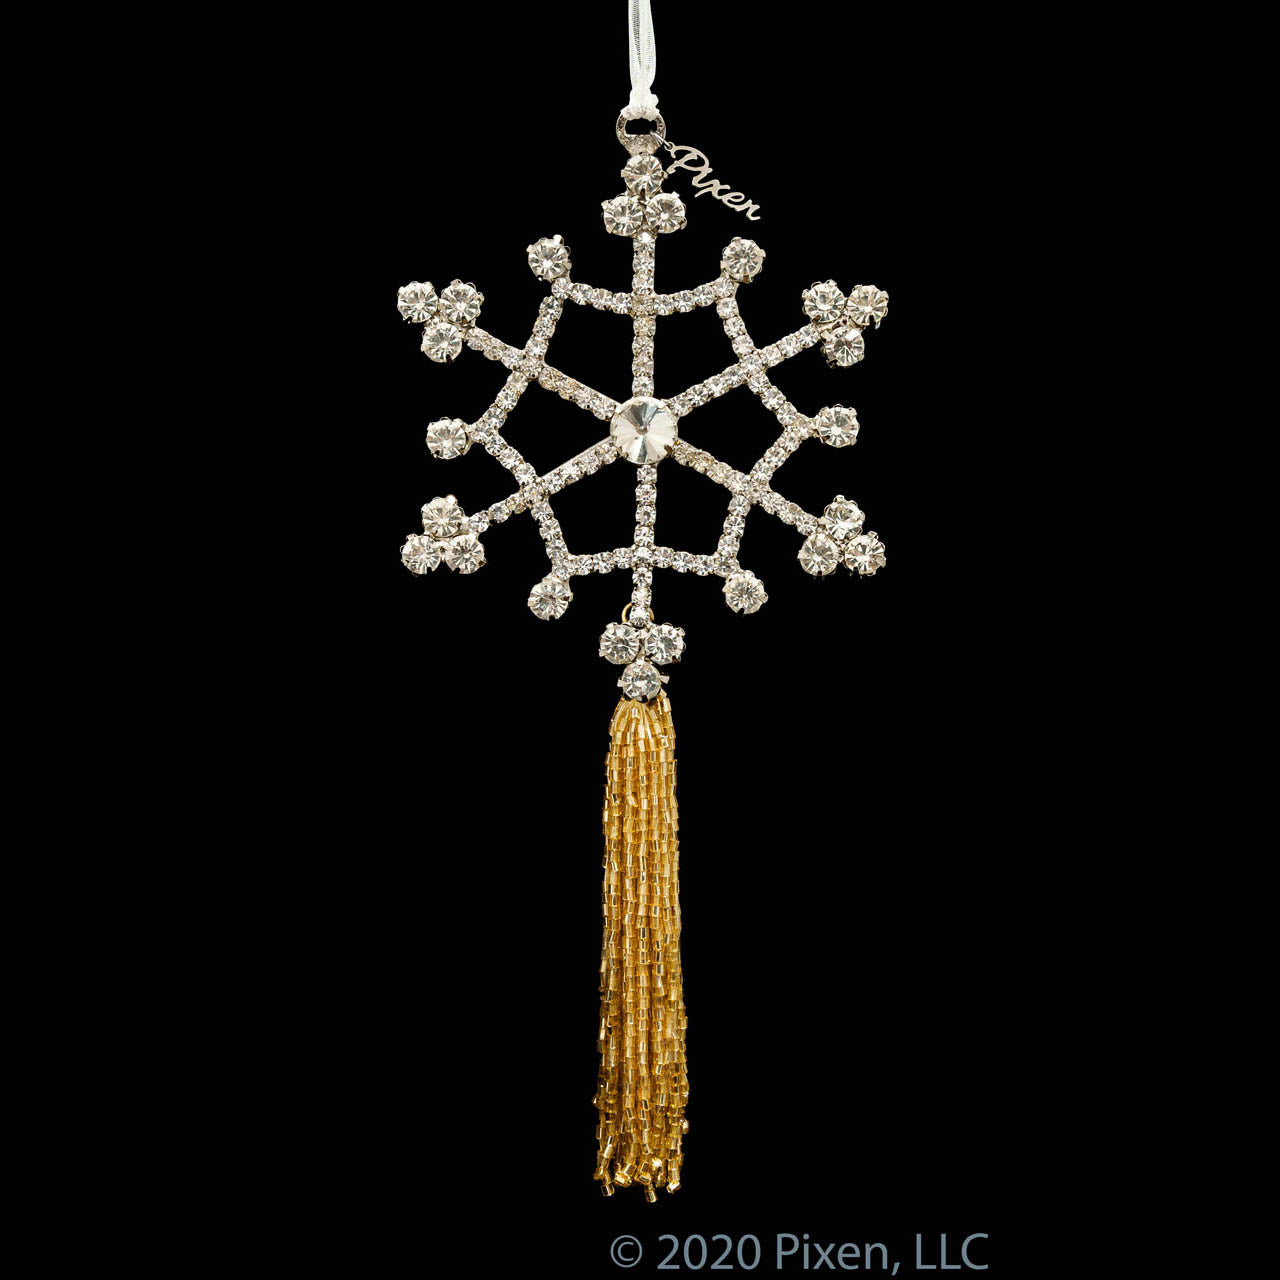 Glimmer by Pixen, a snowflake holiday ornament